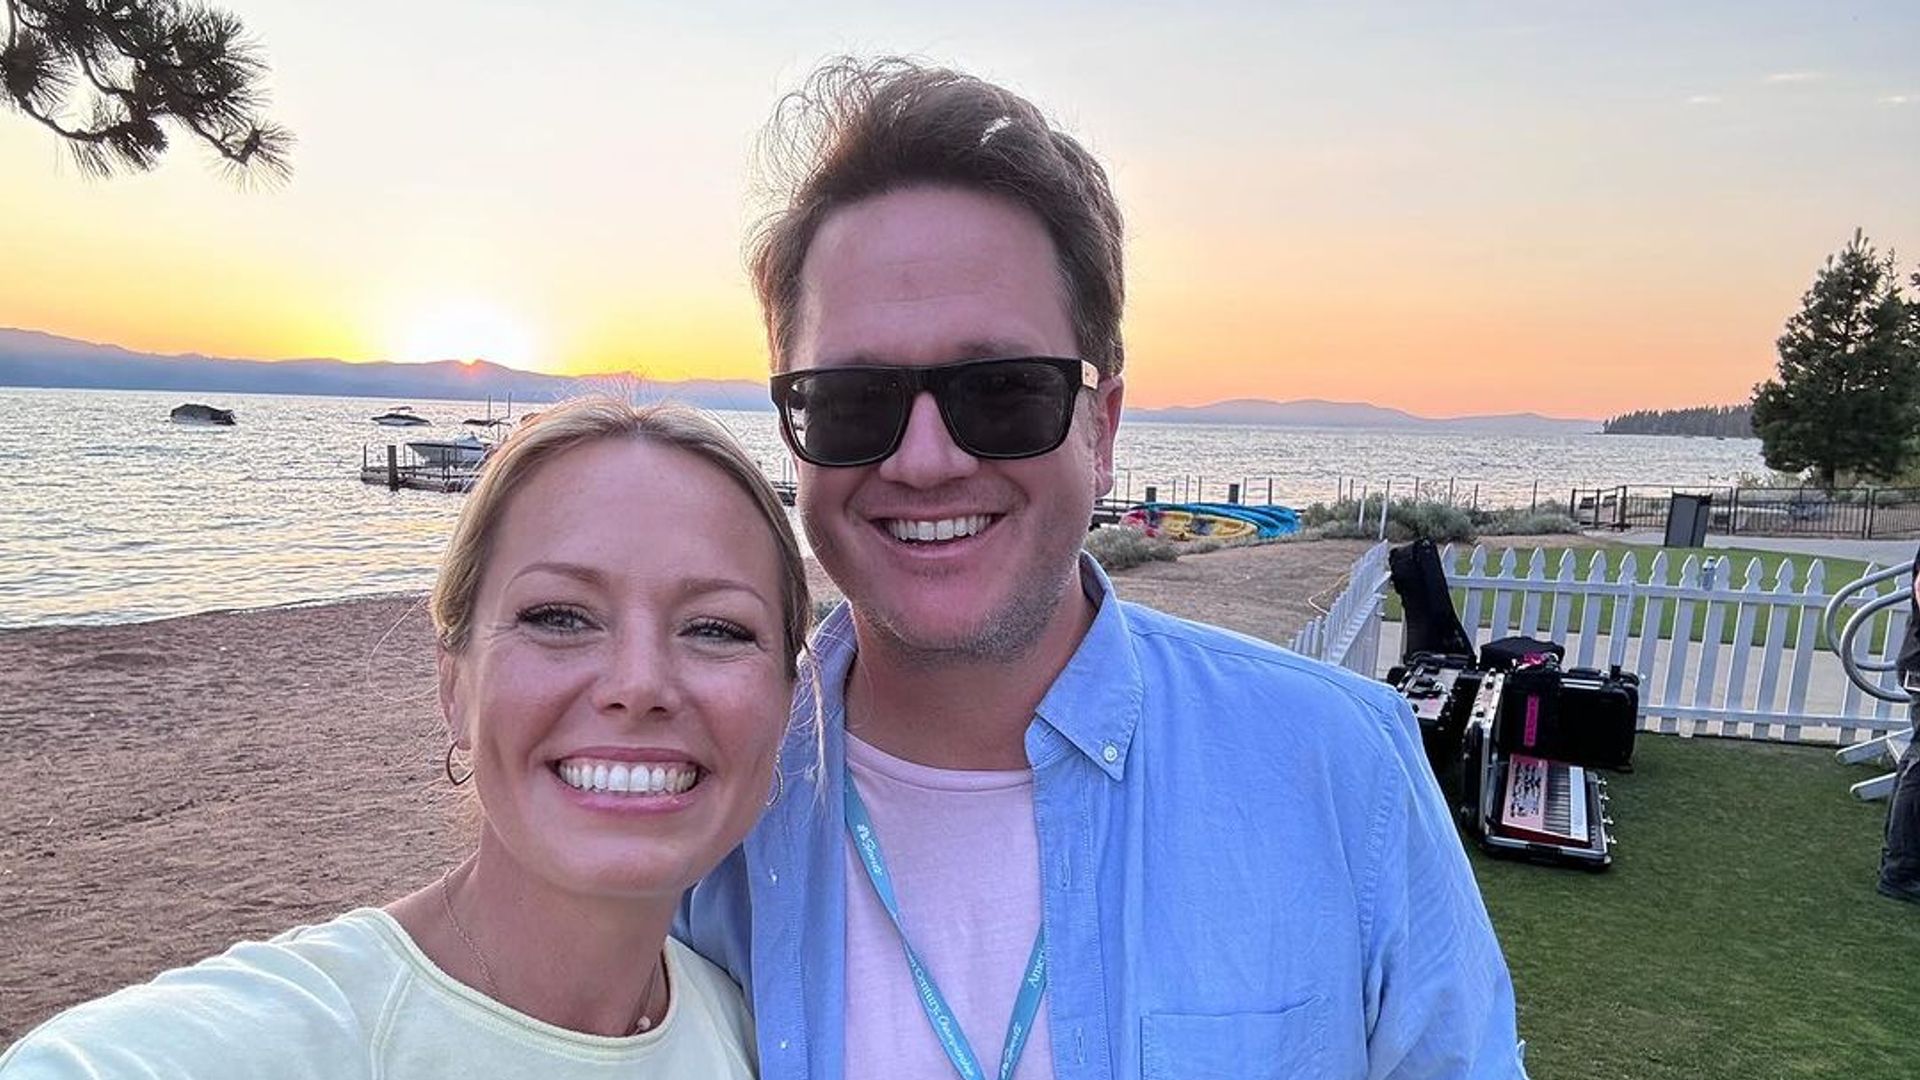 Dylan Dreyer's husband reveals joyful reason for her extended absence from Today